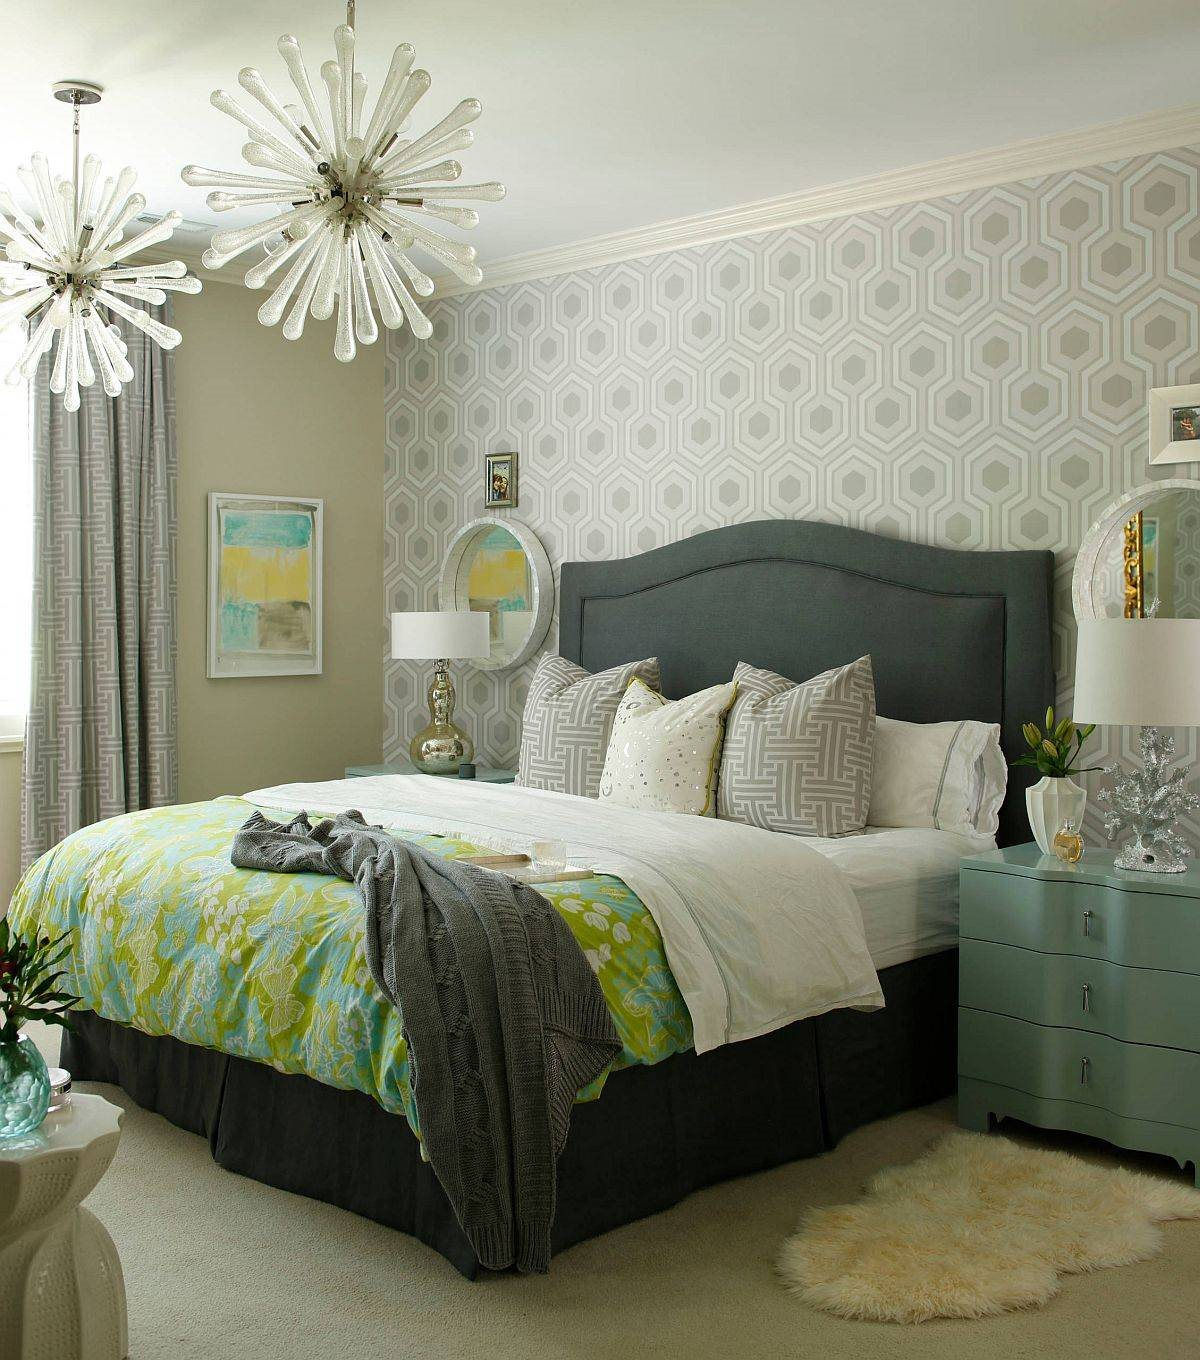 iconic-wallpaper-with-david-hicks-hexagons-is-a-great-way-to-bring-pattern-into-the-bedroom-11819.jpg